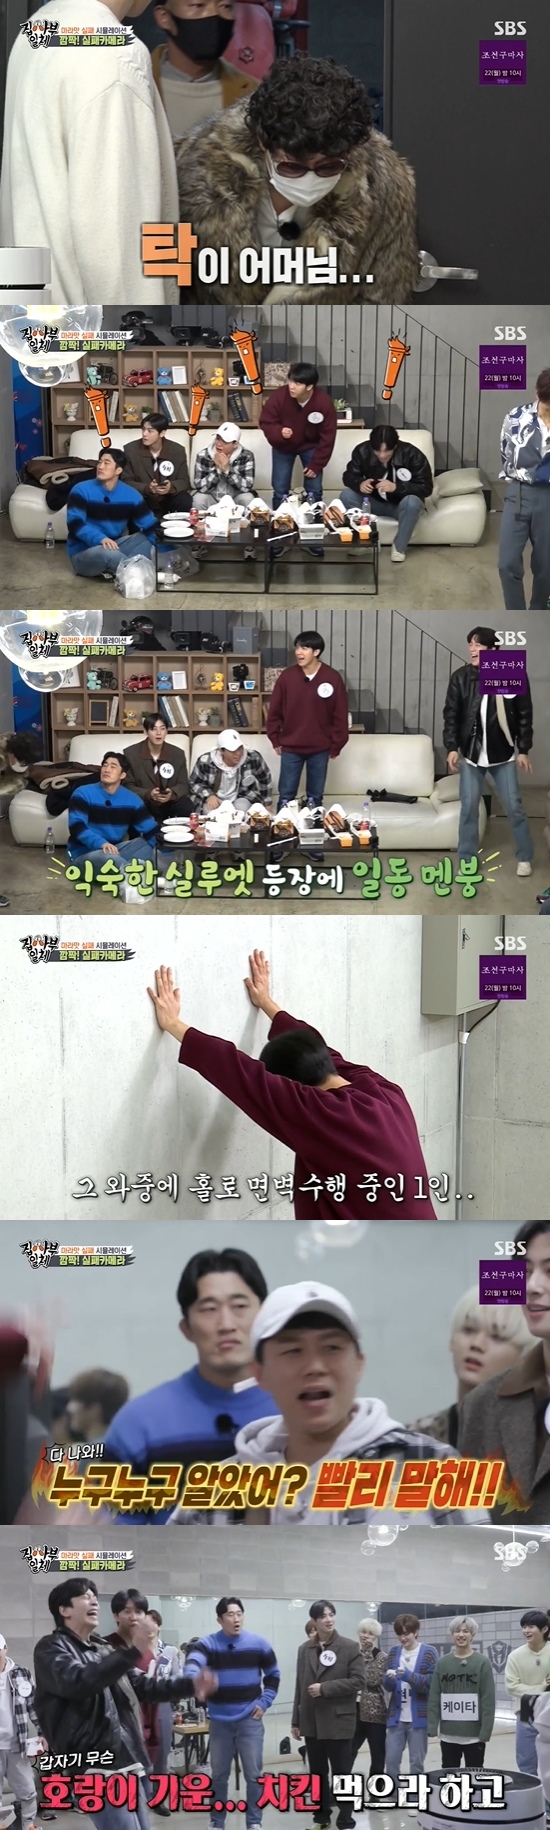 Rain, Lee Sang-min and Tak Jae-hun have been thrillingly deceiving All The Butlers members.On SBS All The Butlers broadcast on the 14th, Rain released his house.On the day, Tak Jae-hun and Lee Sang-min headed to Rains house with the members.Ive done too much Failure since high school, said Rain, who is trying to get into the Failure Festival as an invited singer.When Lee Seung-gi asked Rain about three big Failures he thought, Tak Jae-hun laughed, saying, Lets see your bike.I sold it all, Rain said.Shin Seong-rok revealed Rains debut as an original group fan club, saying: I debuted as an idol in 97; if you live all over the world, you may not succeed when you do a project.It is my mind to overcome it. I have to think about Failure. I have to draw Failure simulation. If I go out as an invited singer, what can I get? Rain said. I made an idol group.Come and give me an evaluation. The members said that they would look at it with the investors heart.Cypher performed his debut song Dont Dont Dont, but Tan continued to mischoreen the choreography, so Rain stopped singing and was angry at Tan for being sober.Lee Sang-min said he understood Rain as a producer, saying 15 days before his debut is timeless. Rain took out the wrong choreography.This was all Tak Jae-hun, Lee Sang-min, Rain and Tans surprise Failure Camera.Earlier, Rain told Tak Jae-hun, Lee Sang-min, I think the recording will always be good until now. Lets let you taste the Failure simulation today.Lets go to spicy and salty spicy soup, he said.When Tan was also wrong about choreography, Rain shouted, Timing is late, and said, Why do you want to make the kids fail because of you?Tan went out saying he would cool his head, and Rain asked PD to edit the part related to Cypher; Tak Jae-hun told Rain, Youre a little oversensitive.I just have to go over it roughly, and when Tak Jae-hun left, Lee Sang-min said, Thats my brother going. Yang Se-hyeong was nervous, saying to Lee Sang-min, This is the first time I have broadcast.PD said there was a Chicken PPL, and Lee Seung-gi tried to sort things out.The members ate Chicken to try to reverse the atmosphere, but then Tan returned and said, I have brought my mother, I do not think I can.Tans mother then appeared, but was Tak Jae-hun; members as well as Cypher members were surprised, and Rain said he was fought by a Failure simulation.Rain said he knew Lee Seung-gi would notice, but Lee Seung-gi was shocked, I did not know I was going to be bullied.Yang Se-hyeong was excited, Who knew - the same for the other members.Kim Dong-hyun was tearful because of the Cypher members, and Cha Eun-woo recalled his days as a trainee and wrote advice to Cypher members.Photo = SBS Broadcasting Screen